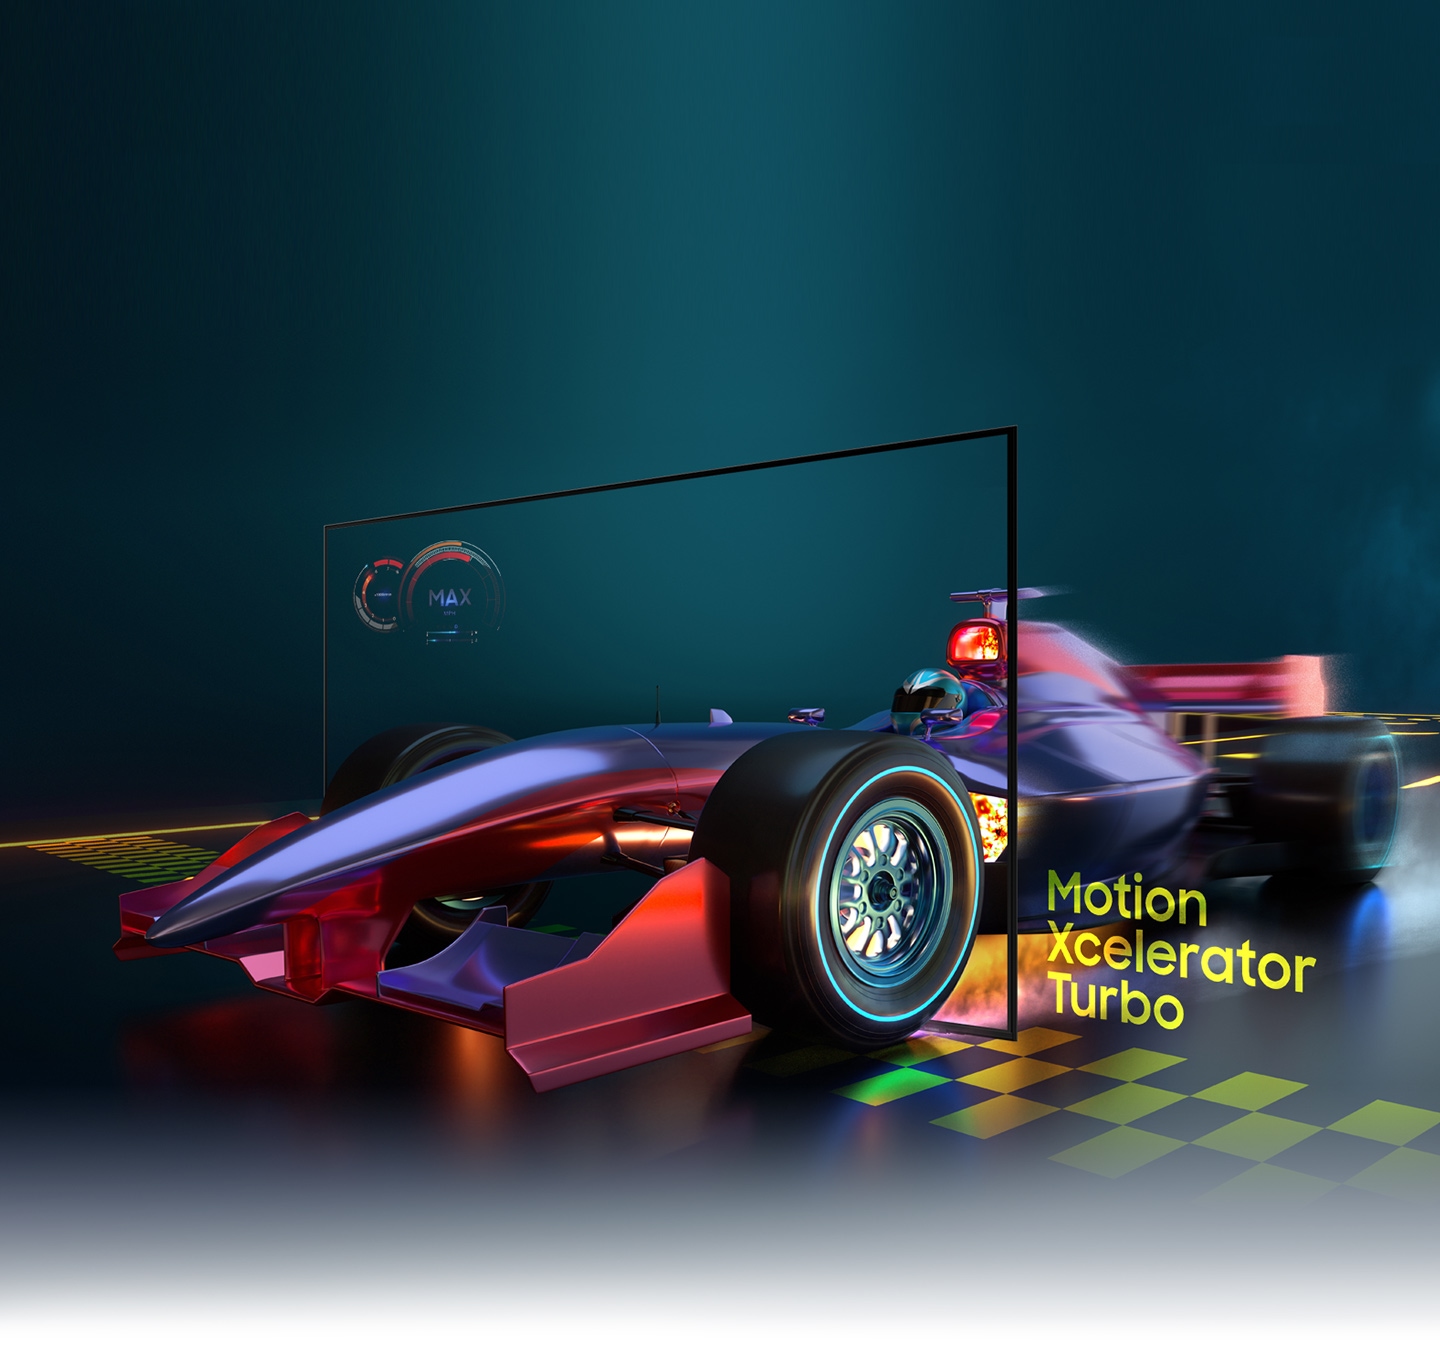 The image of a race car looks clear and visible inside the AU9000 screen due to motion xcelerator turbo technology.